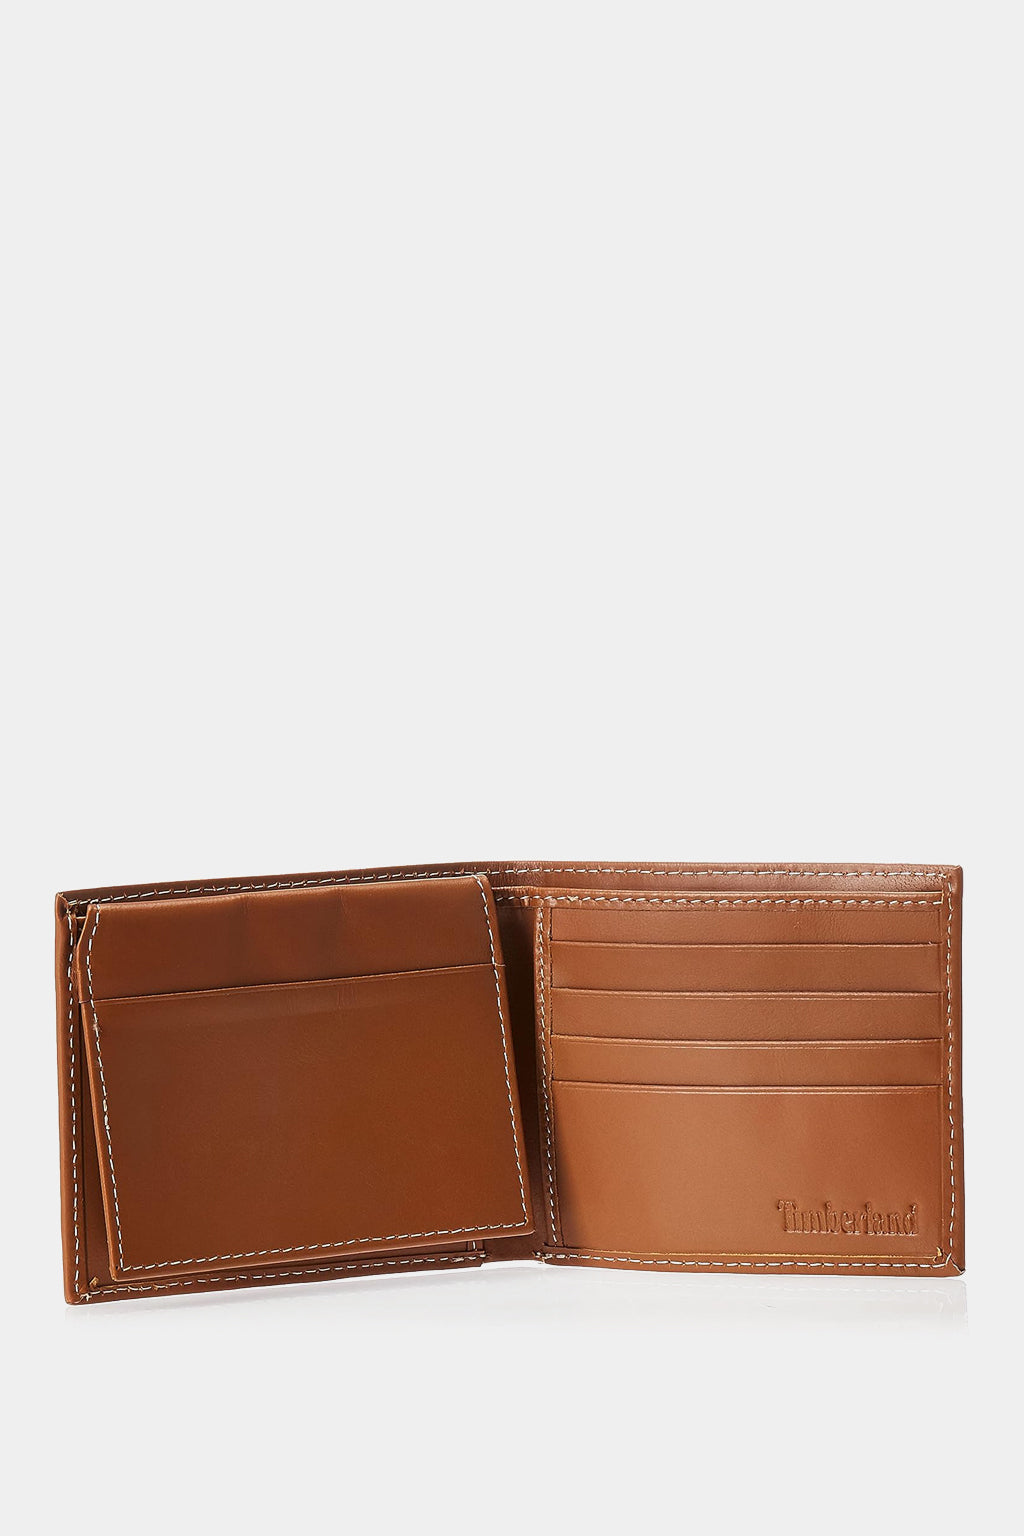 Timberland - Leather Men's Cloudy Passcase